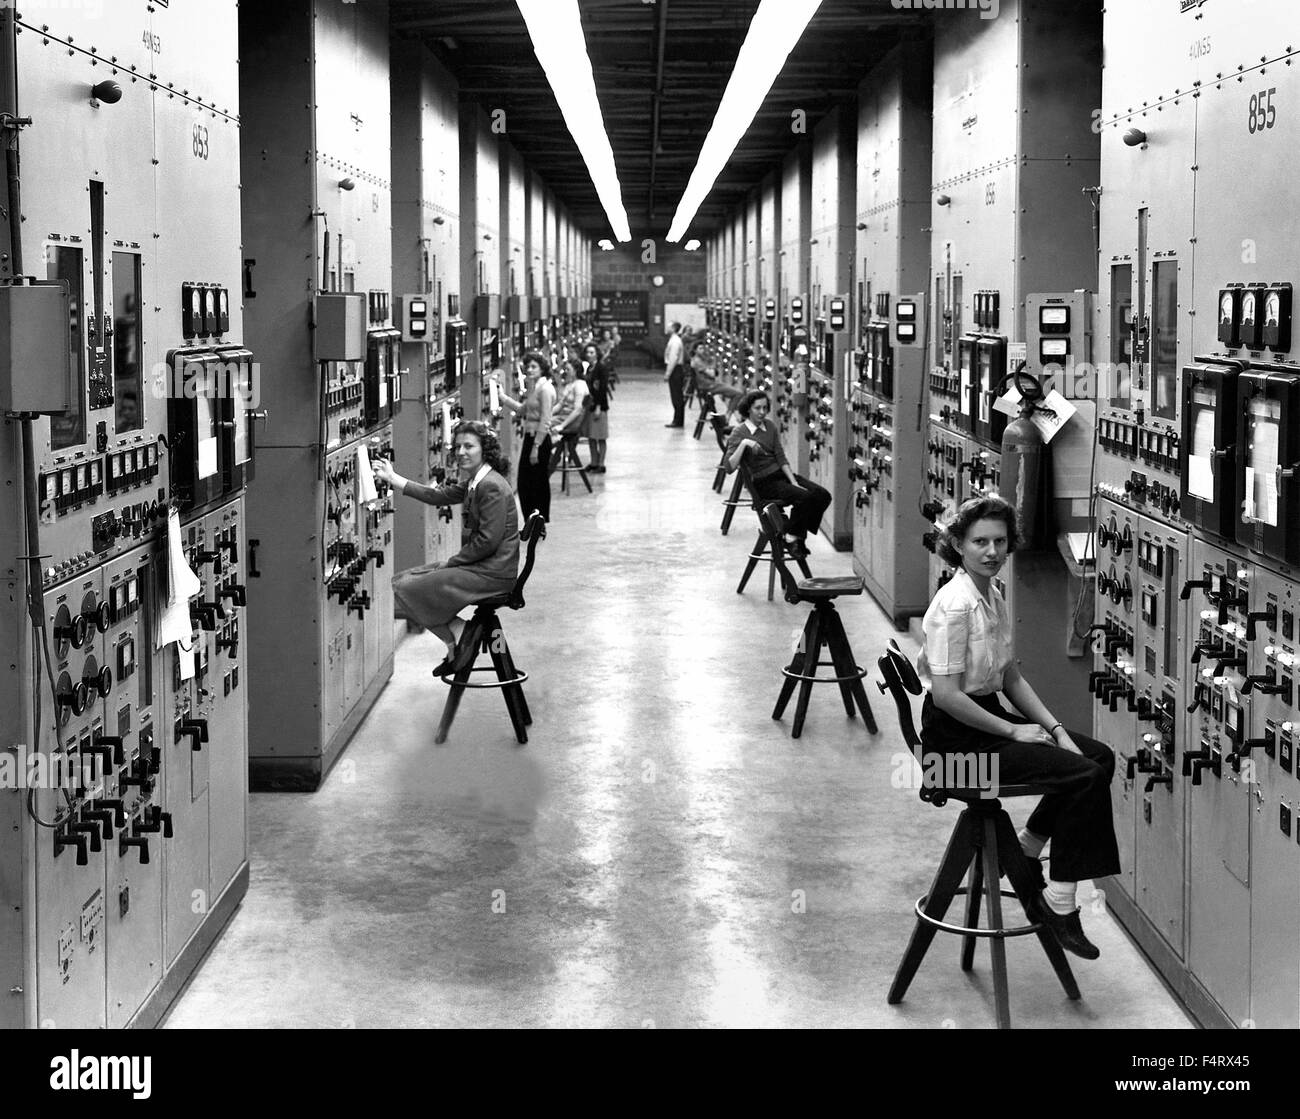 Calutron operators at their panels, in the Y-12 plant at Oak Ridge during World War II. 1944. The calutrons were used to refine Stock Photo